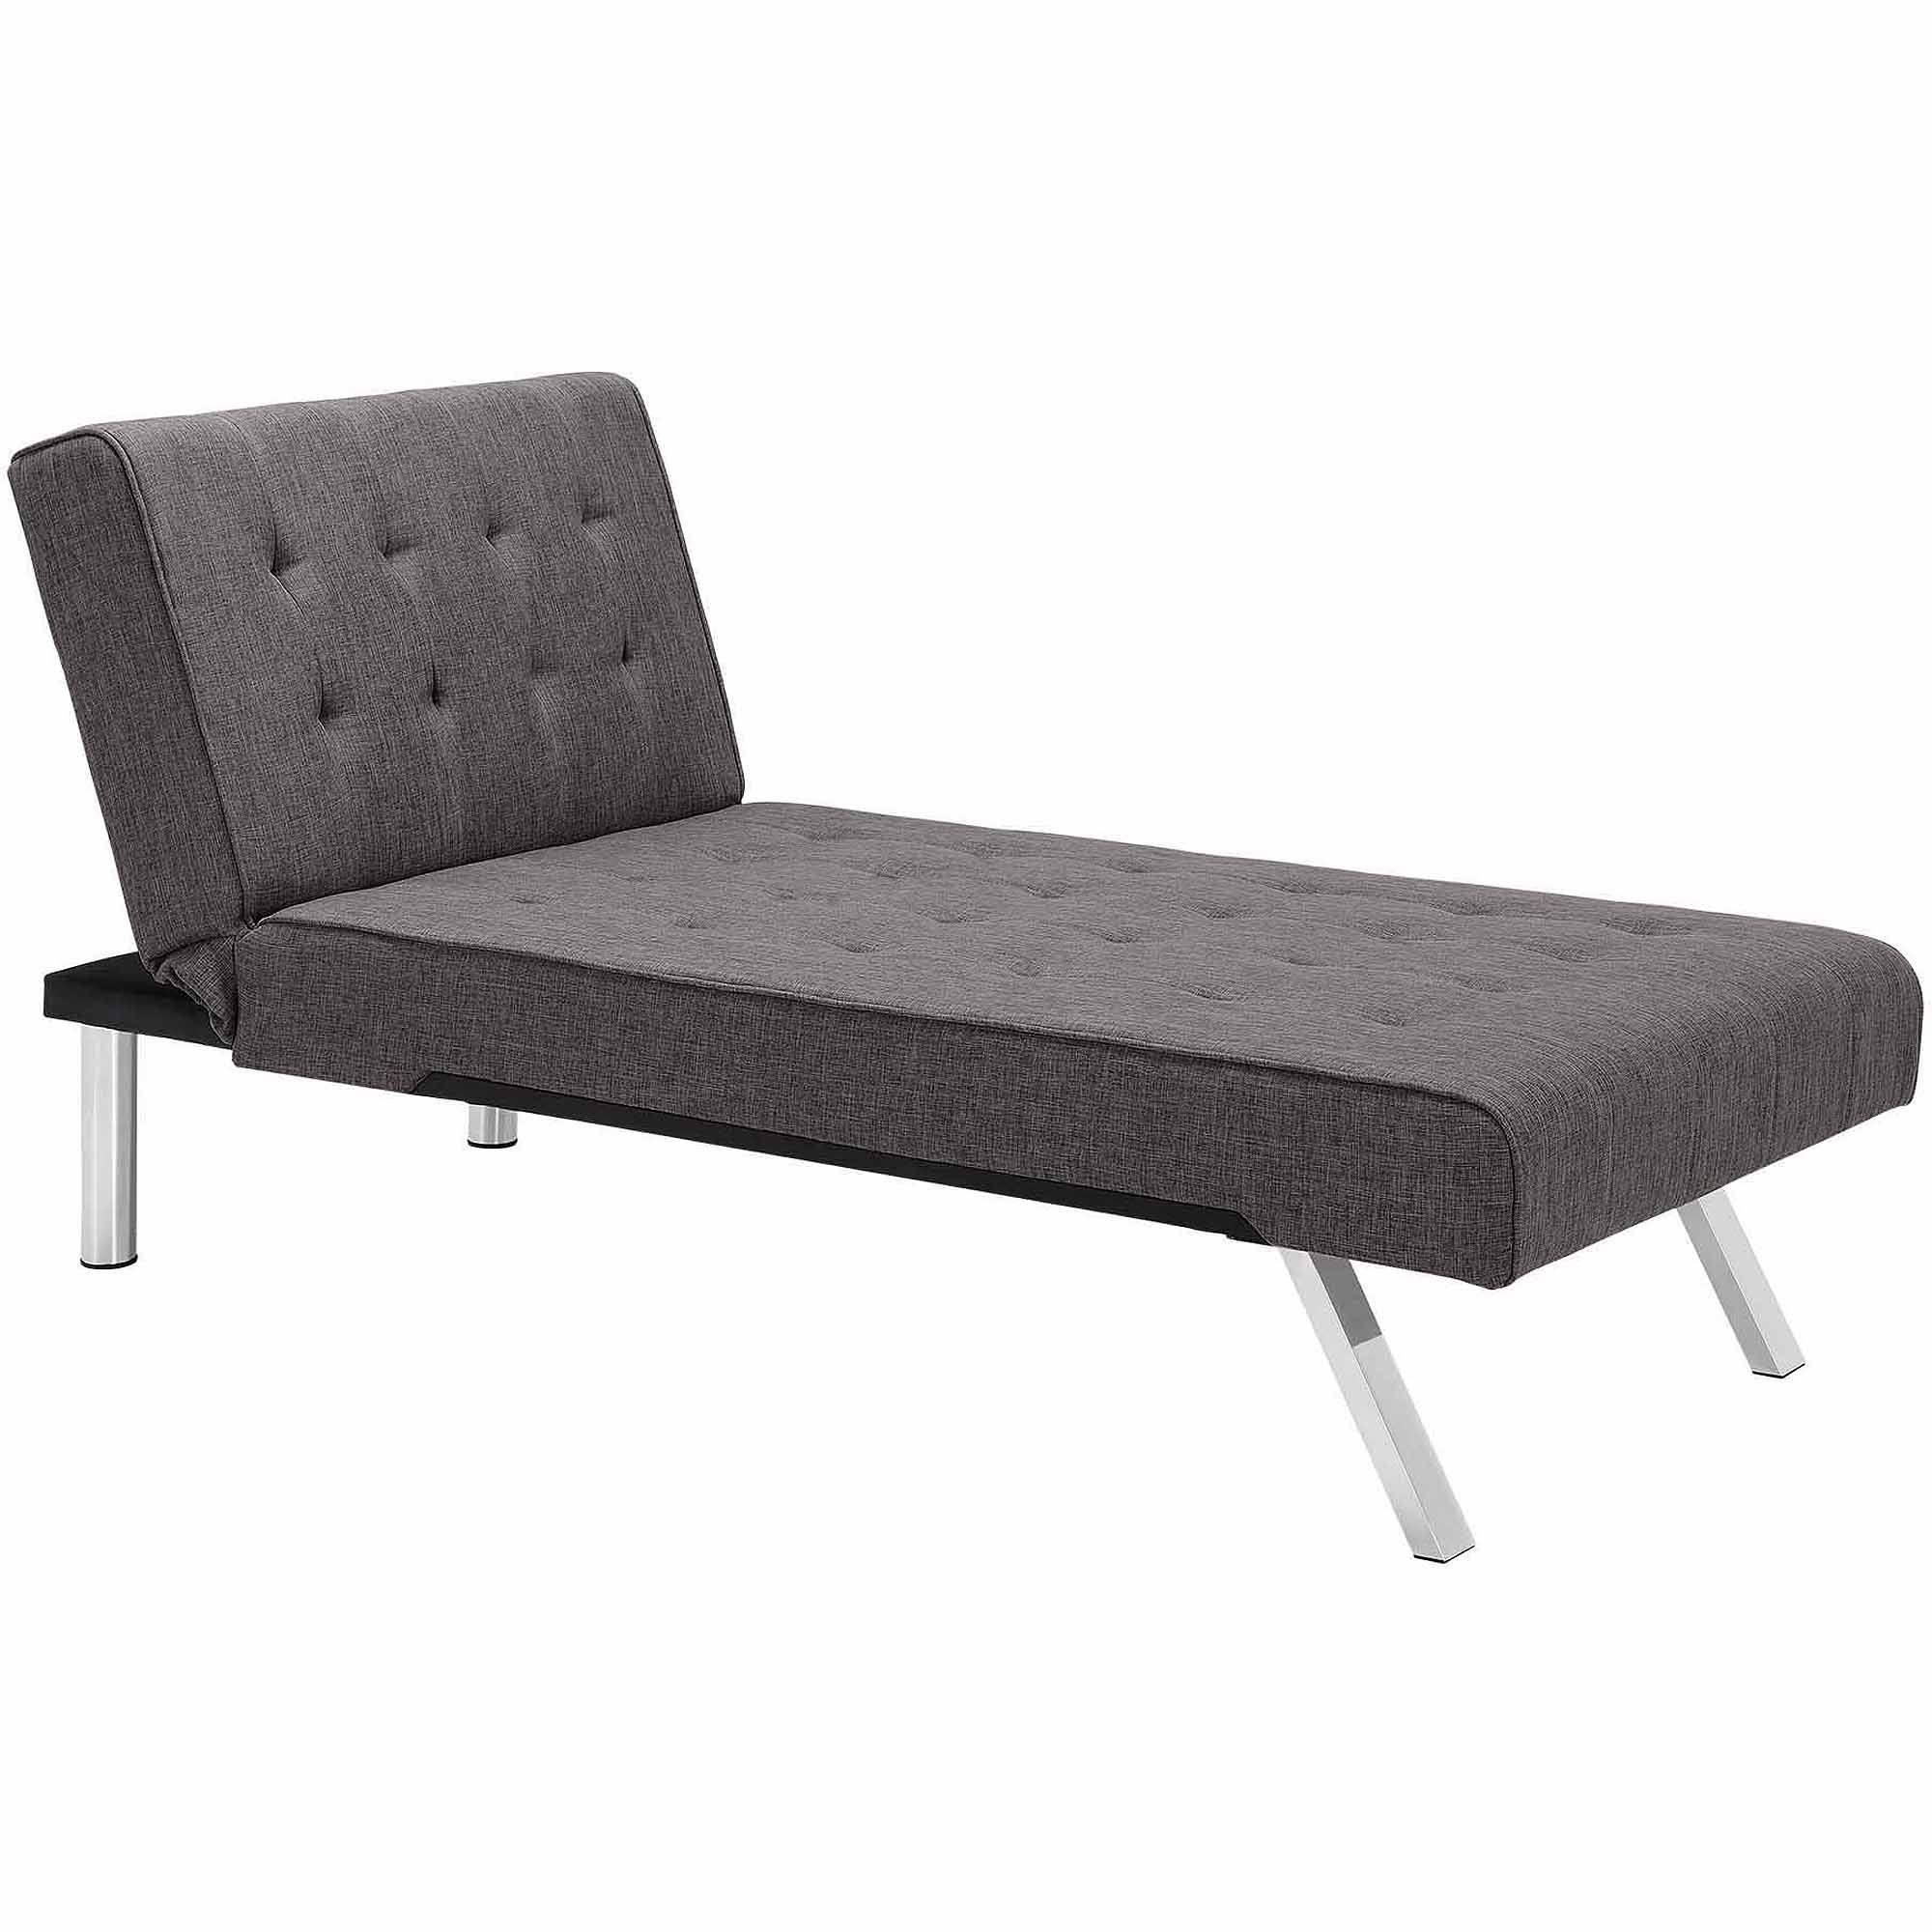 Preferred Walmart Chaise Lounges Intended For Dhp Emily Futon Chaise Lounger, Multiple Colors – Walmart (Photo 5 of 15)